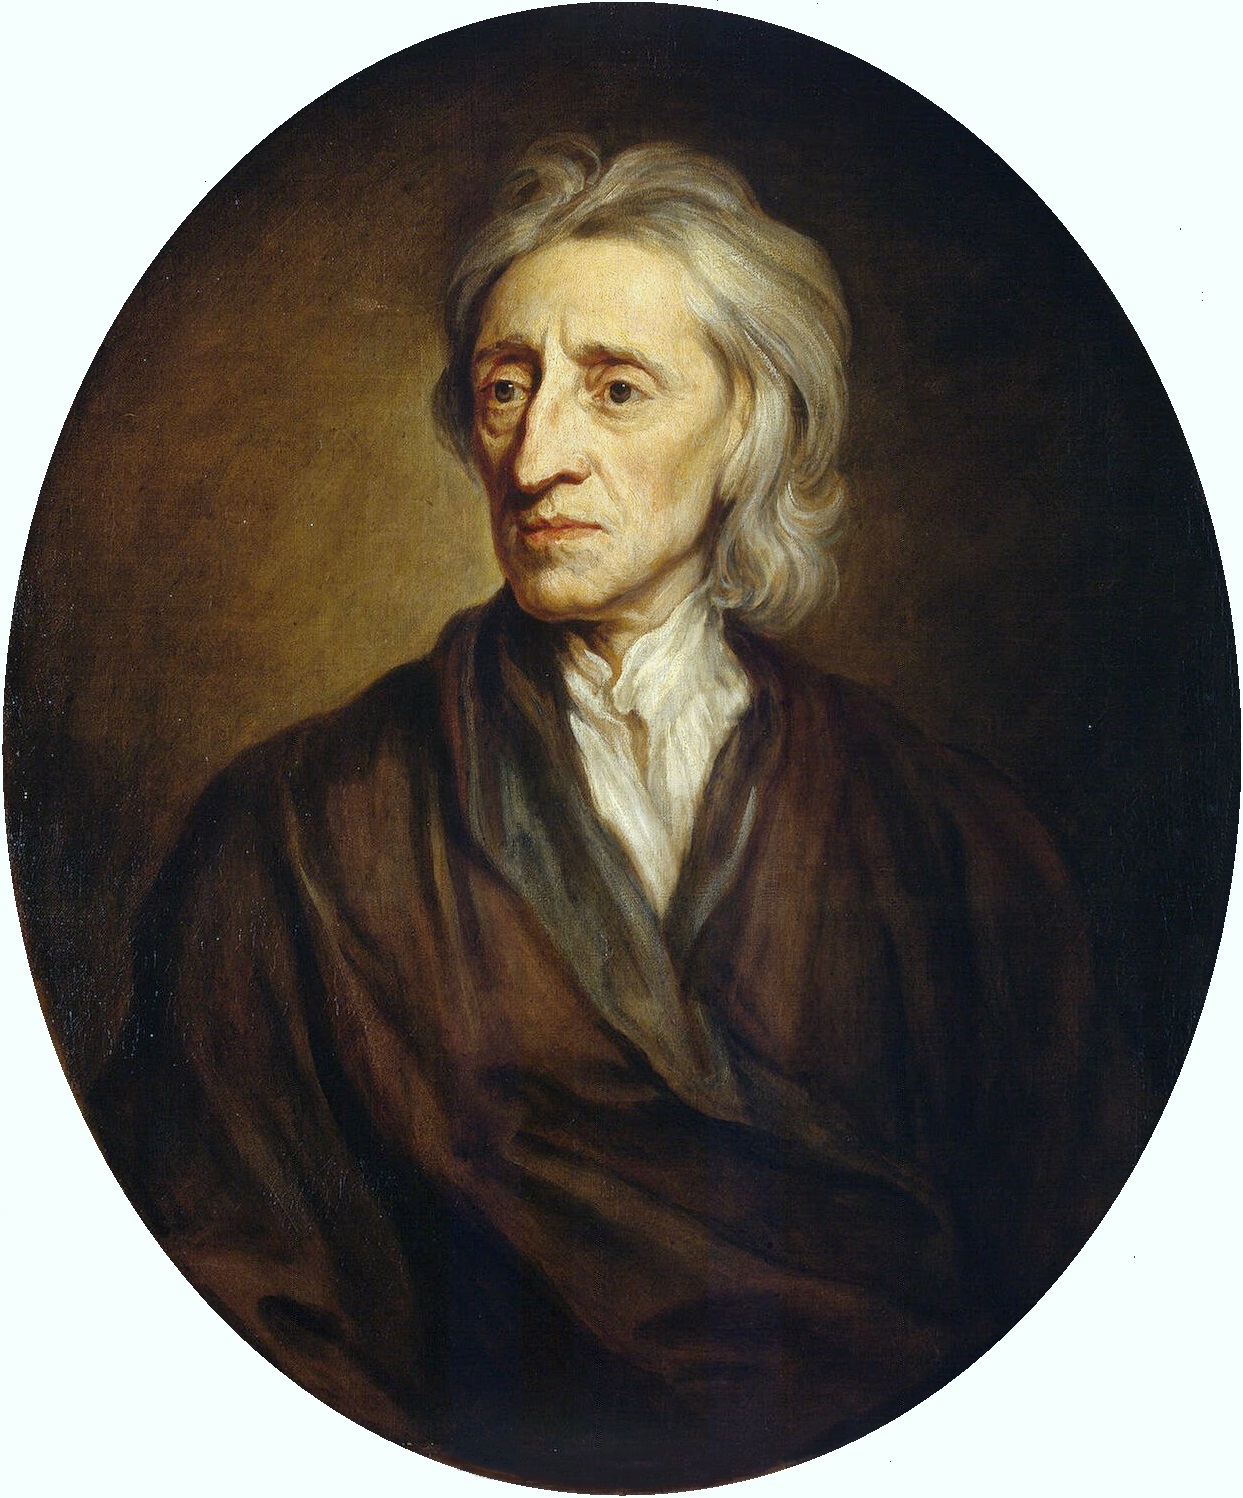 John Locke (29 August 1632 to 28 October 1704), the first to develop a liberal philosophy that included the right to private property and the necessity for government to have the consent of the governed.